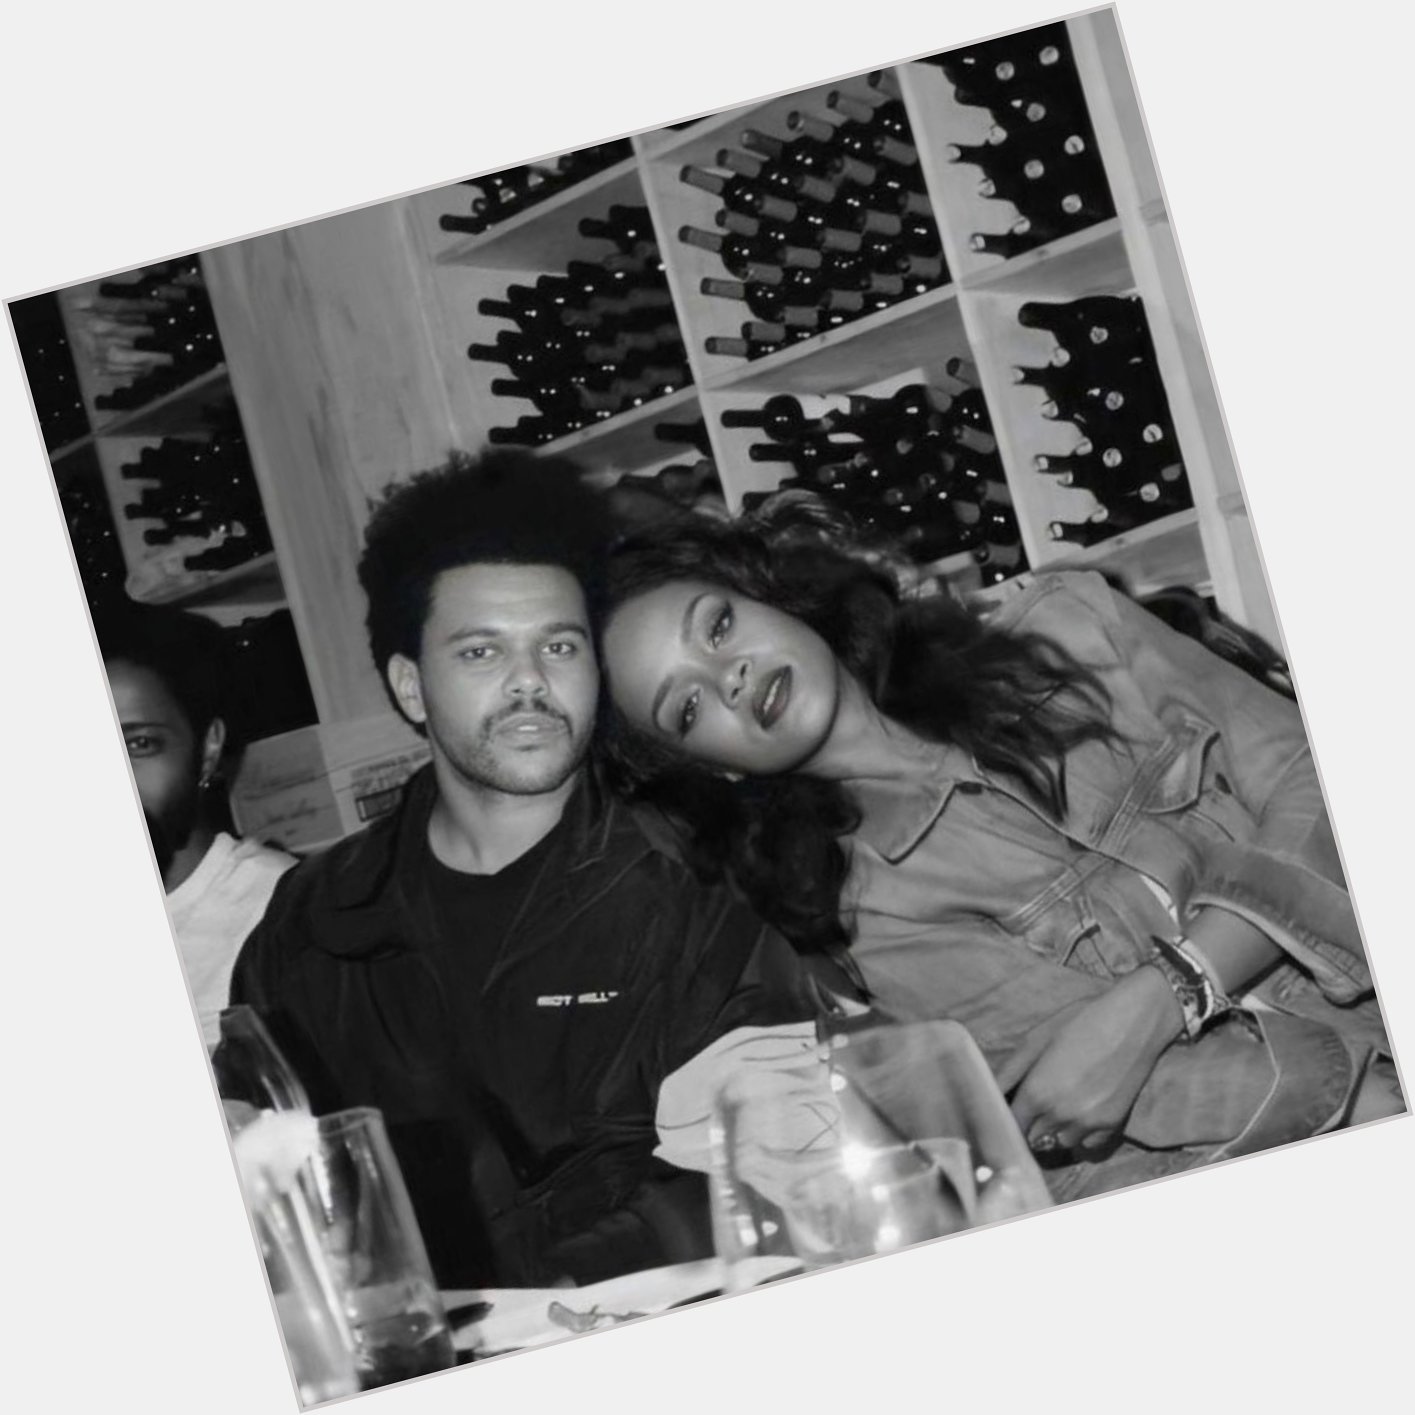 Happy 32nd birthday to the weeknd! 